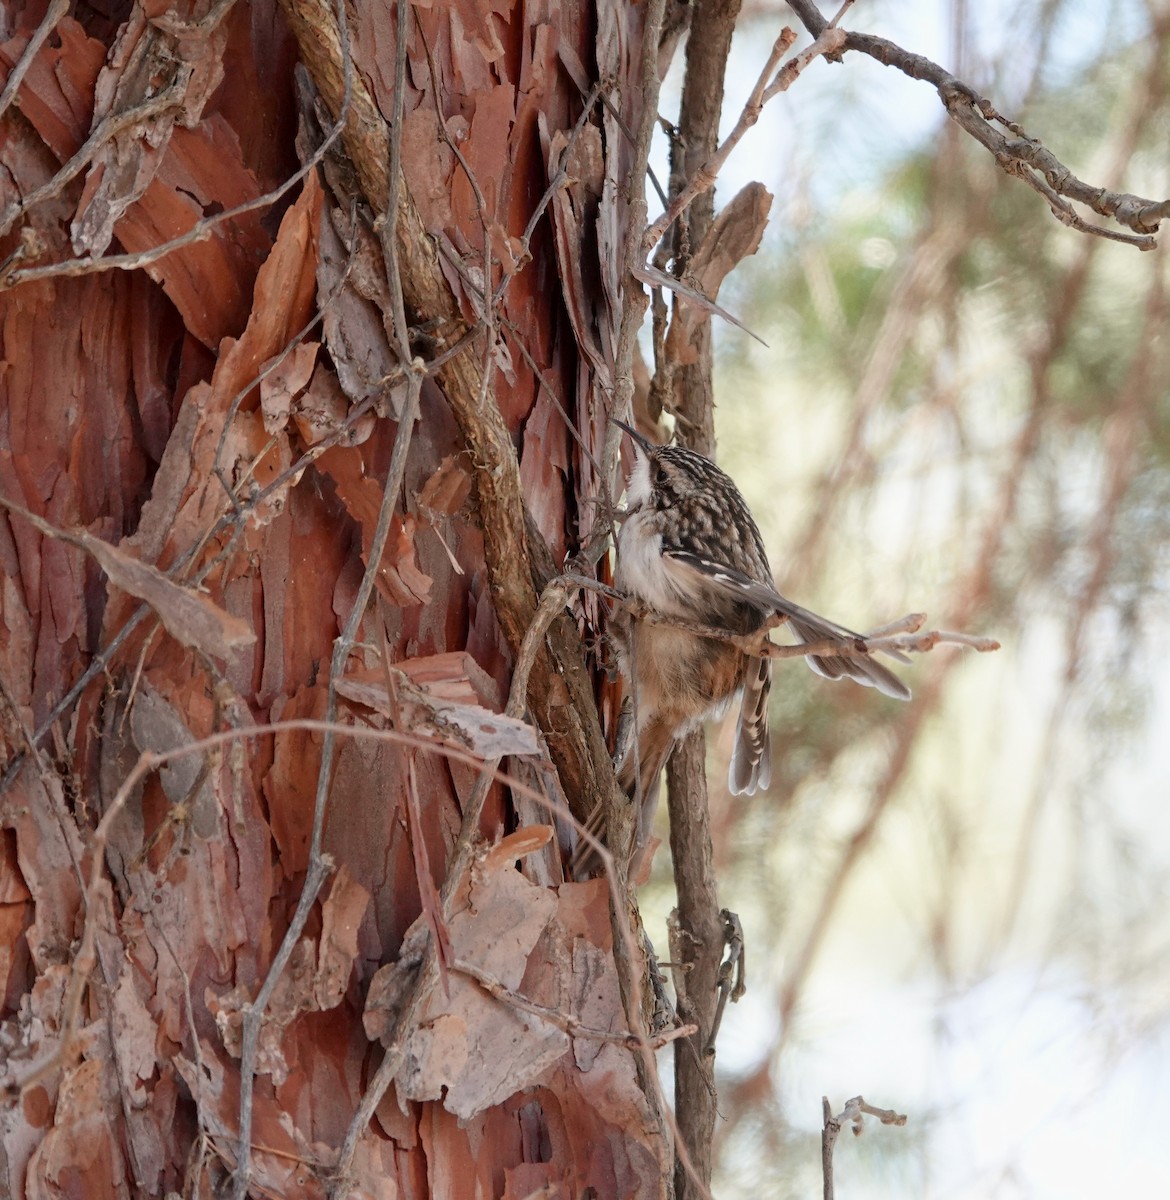 Brown Creeper - Andrew Bailey